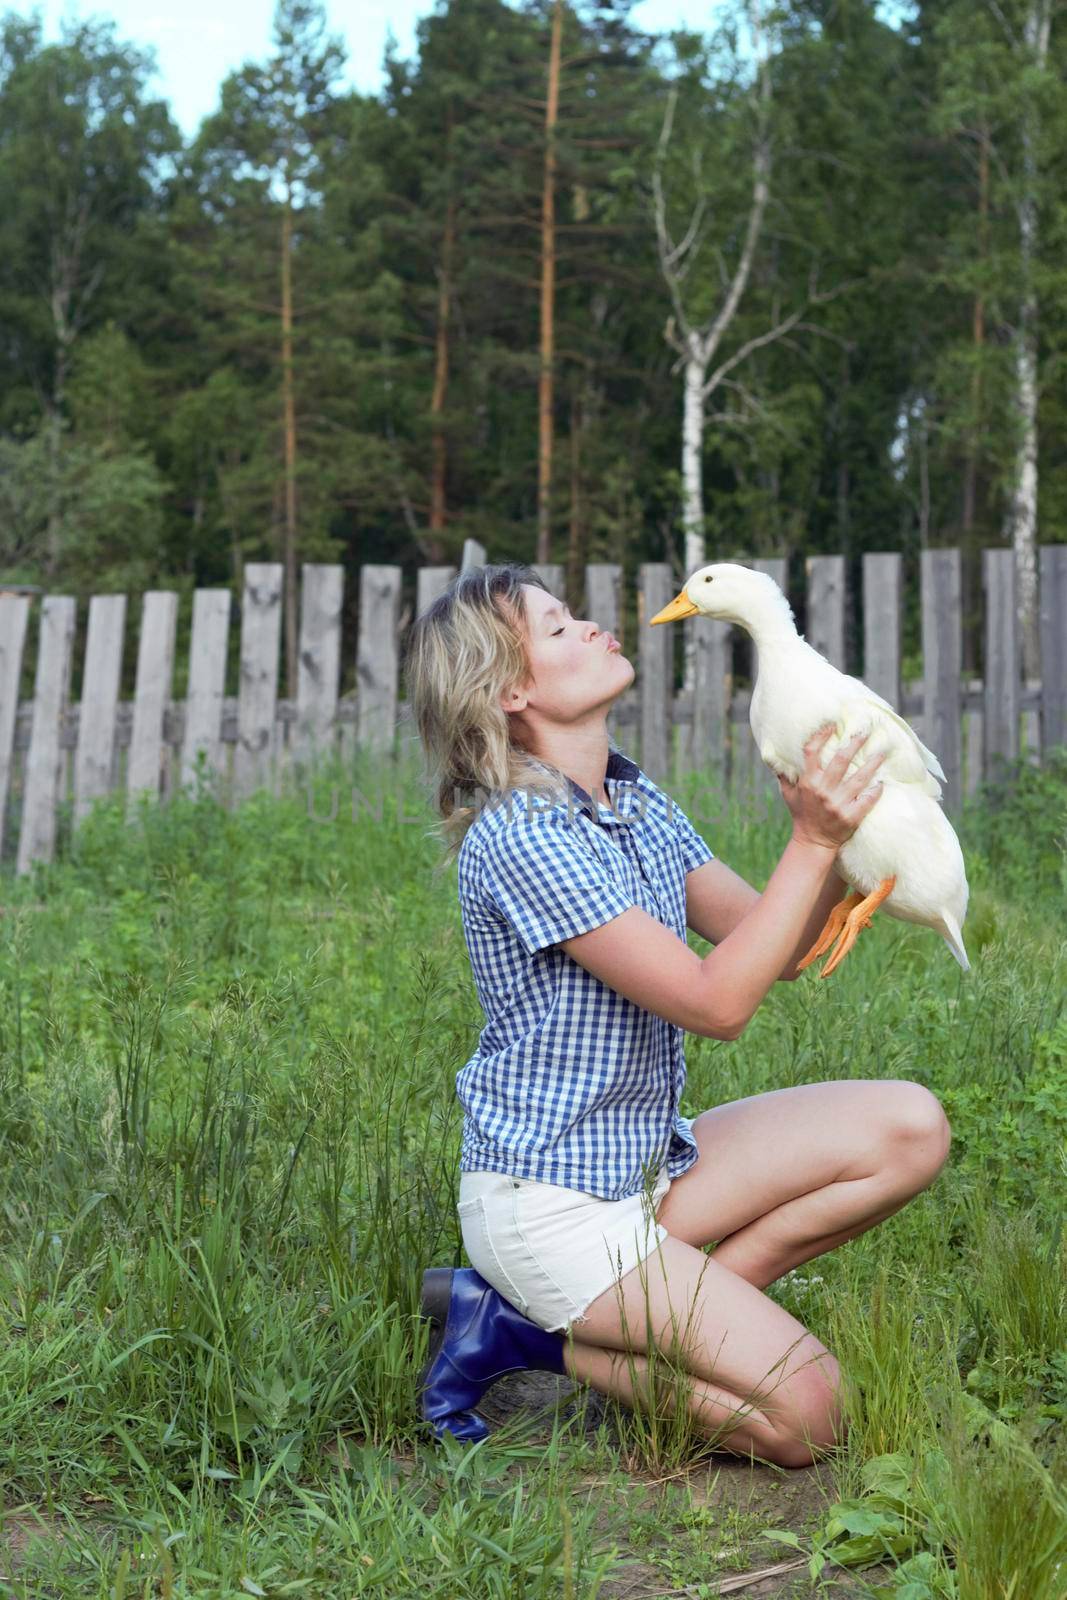 A young woman is holding a white duck in the village on green grass. Farm domestic animals